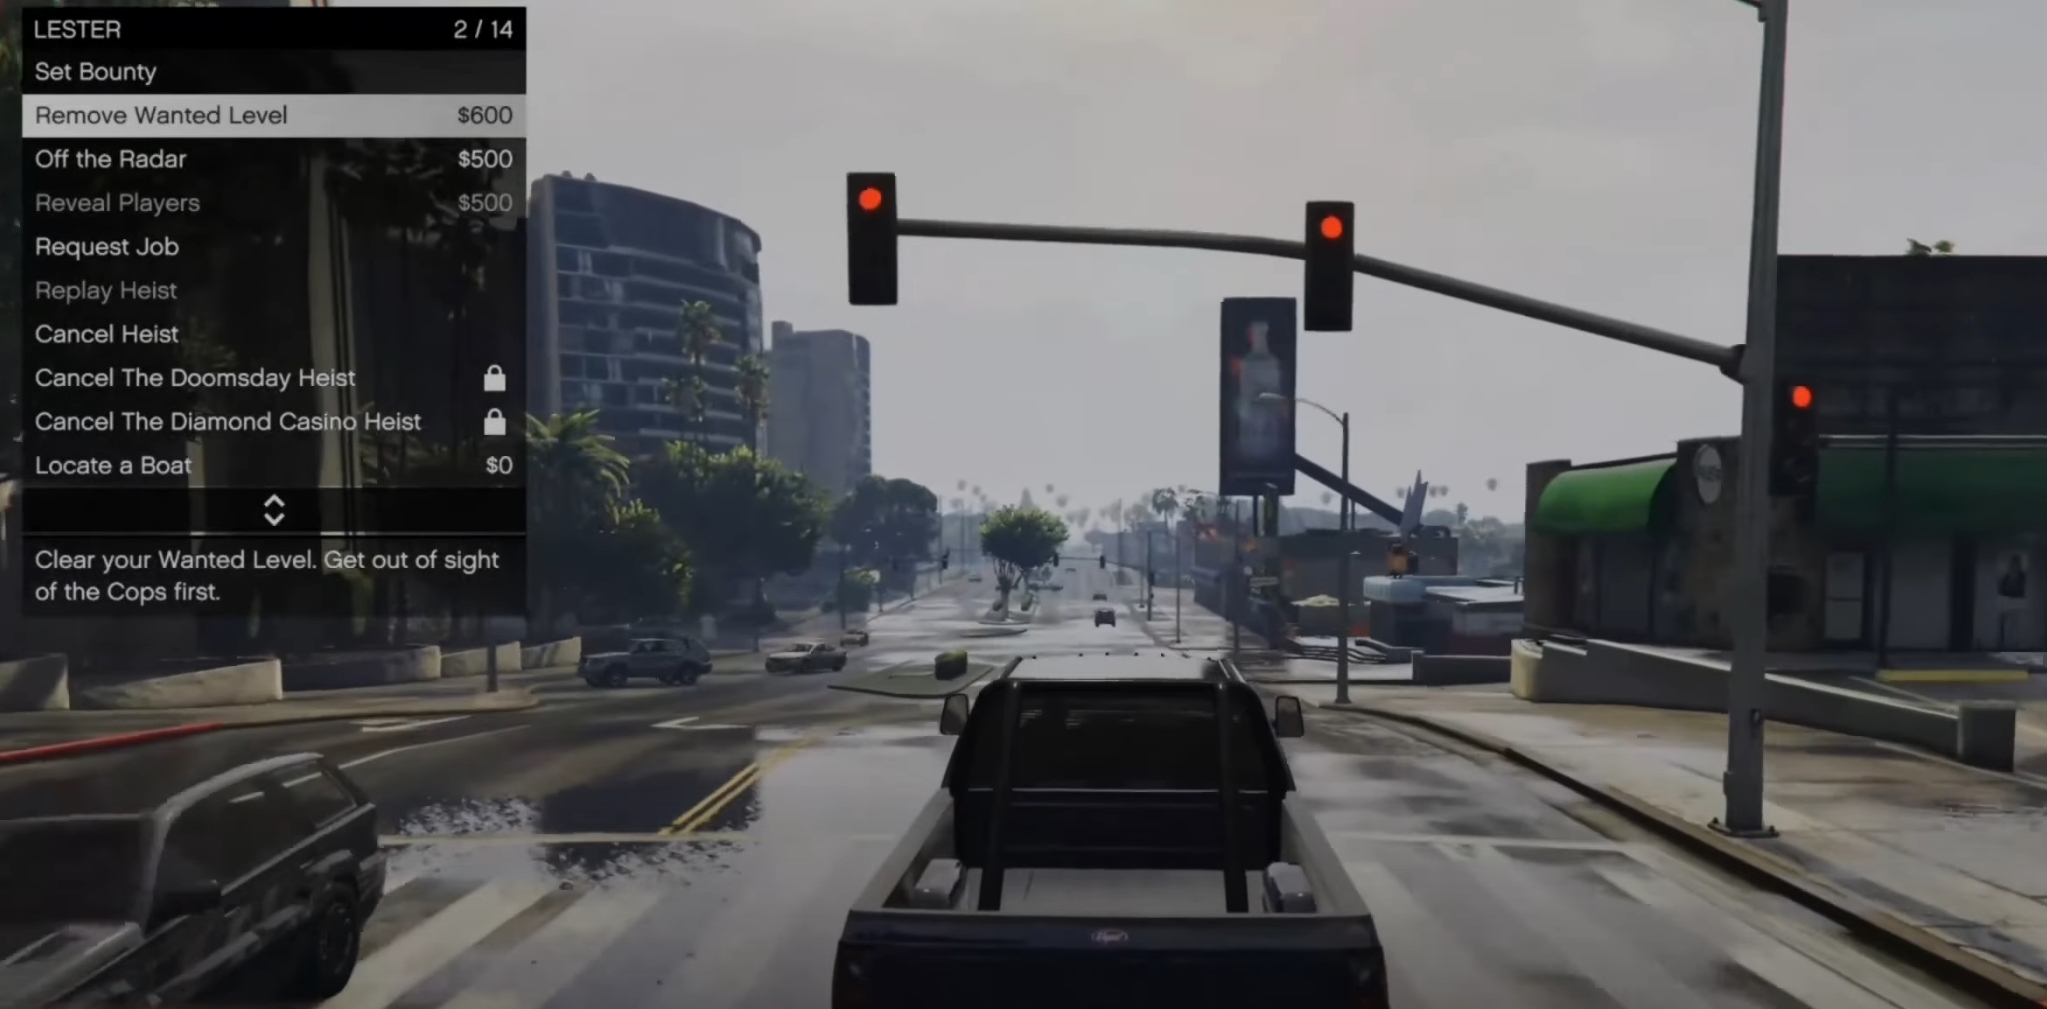 How To Lose Police In Gta 5 Cheat 